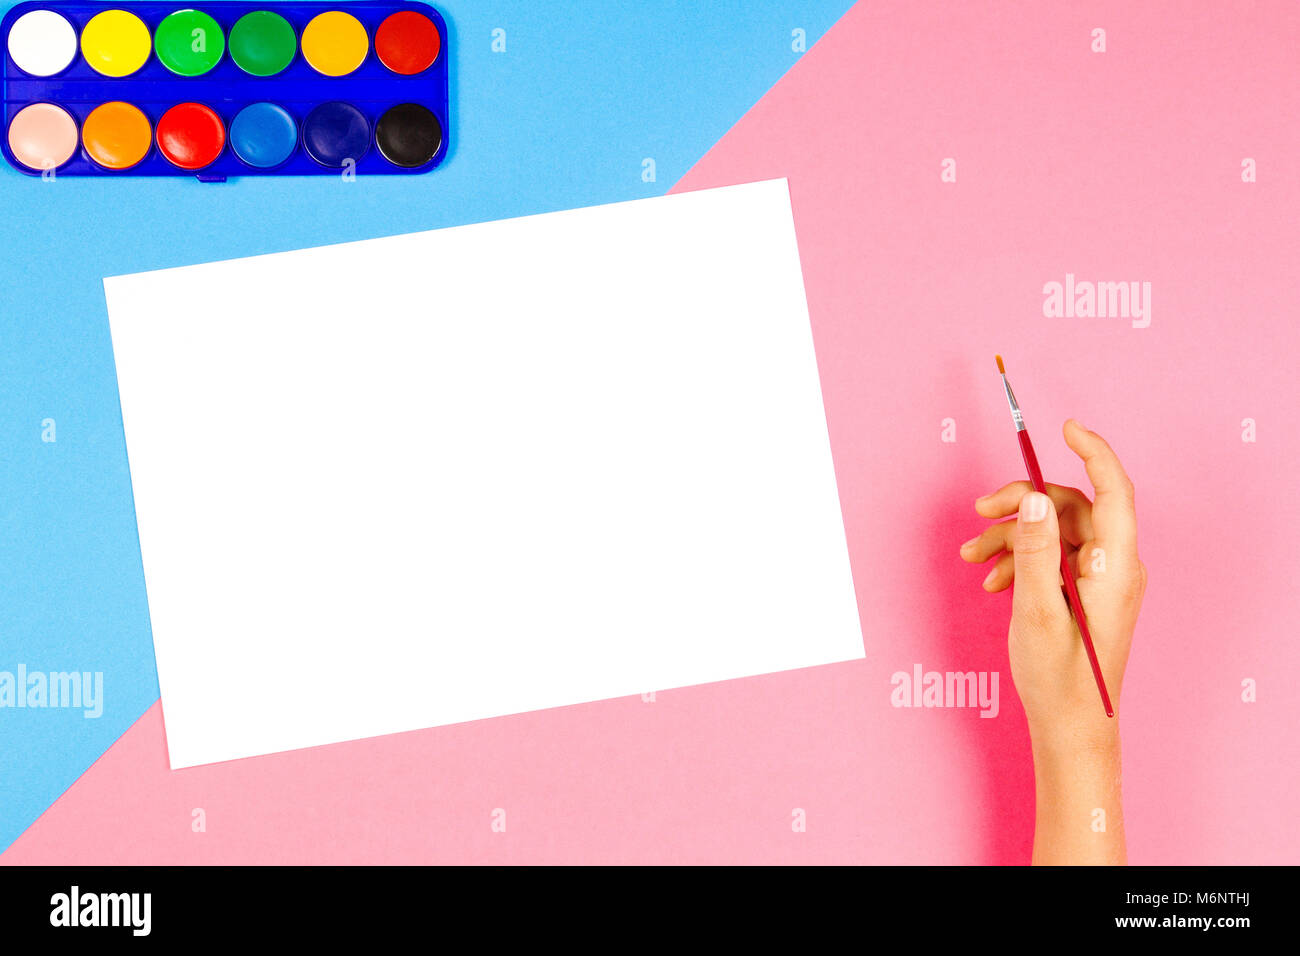 Child hand painting with paintbrush and watercolor paints on colorful background Stock Photo